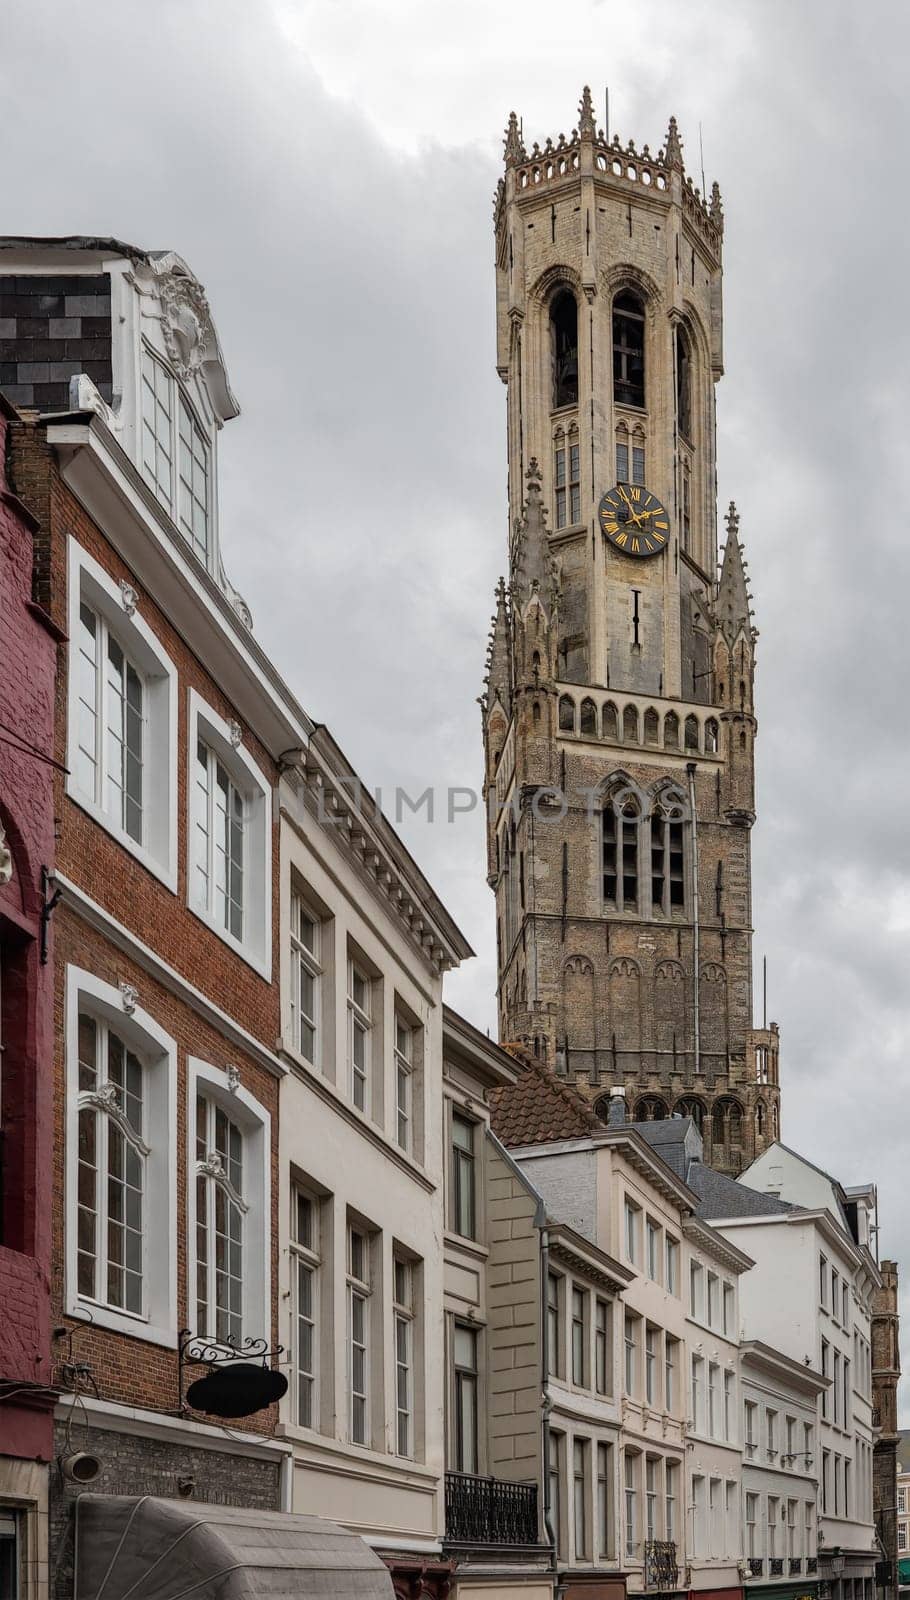 The belfry of Bruges is a medieval bell tower in the historical centre of Bruges, Belgium.